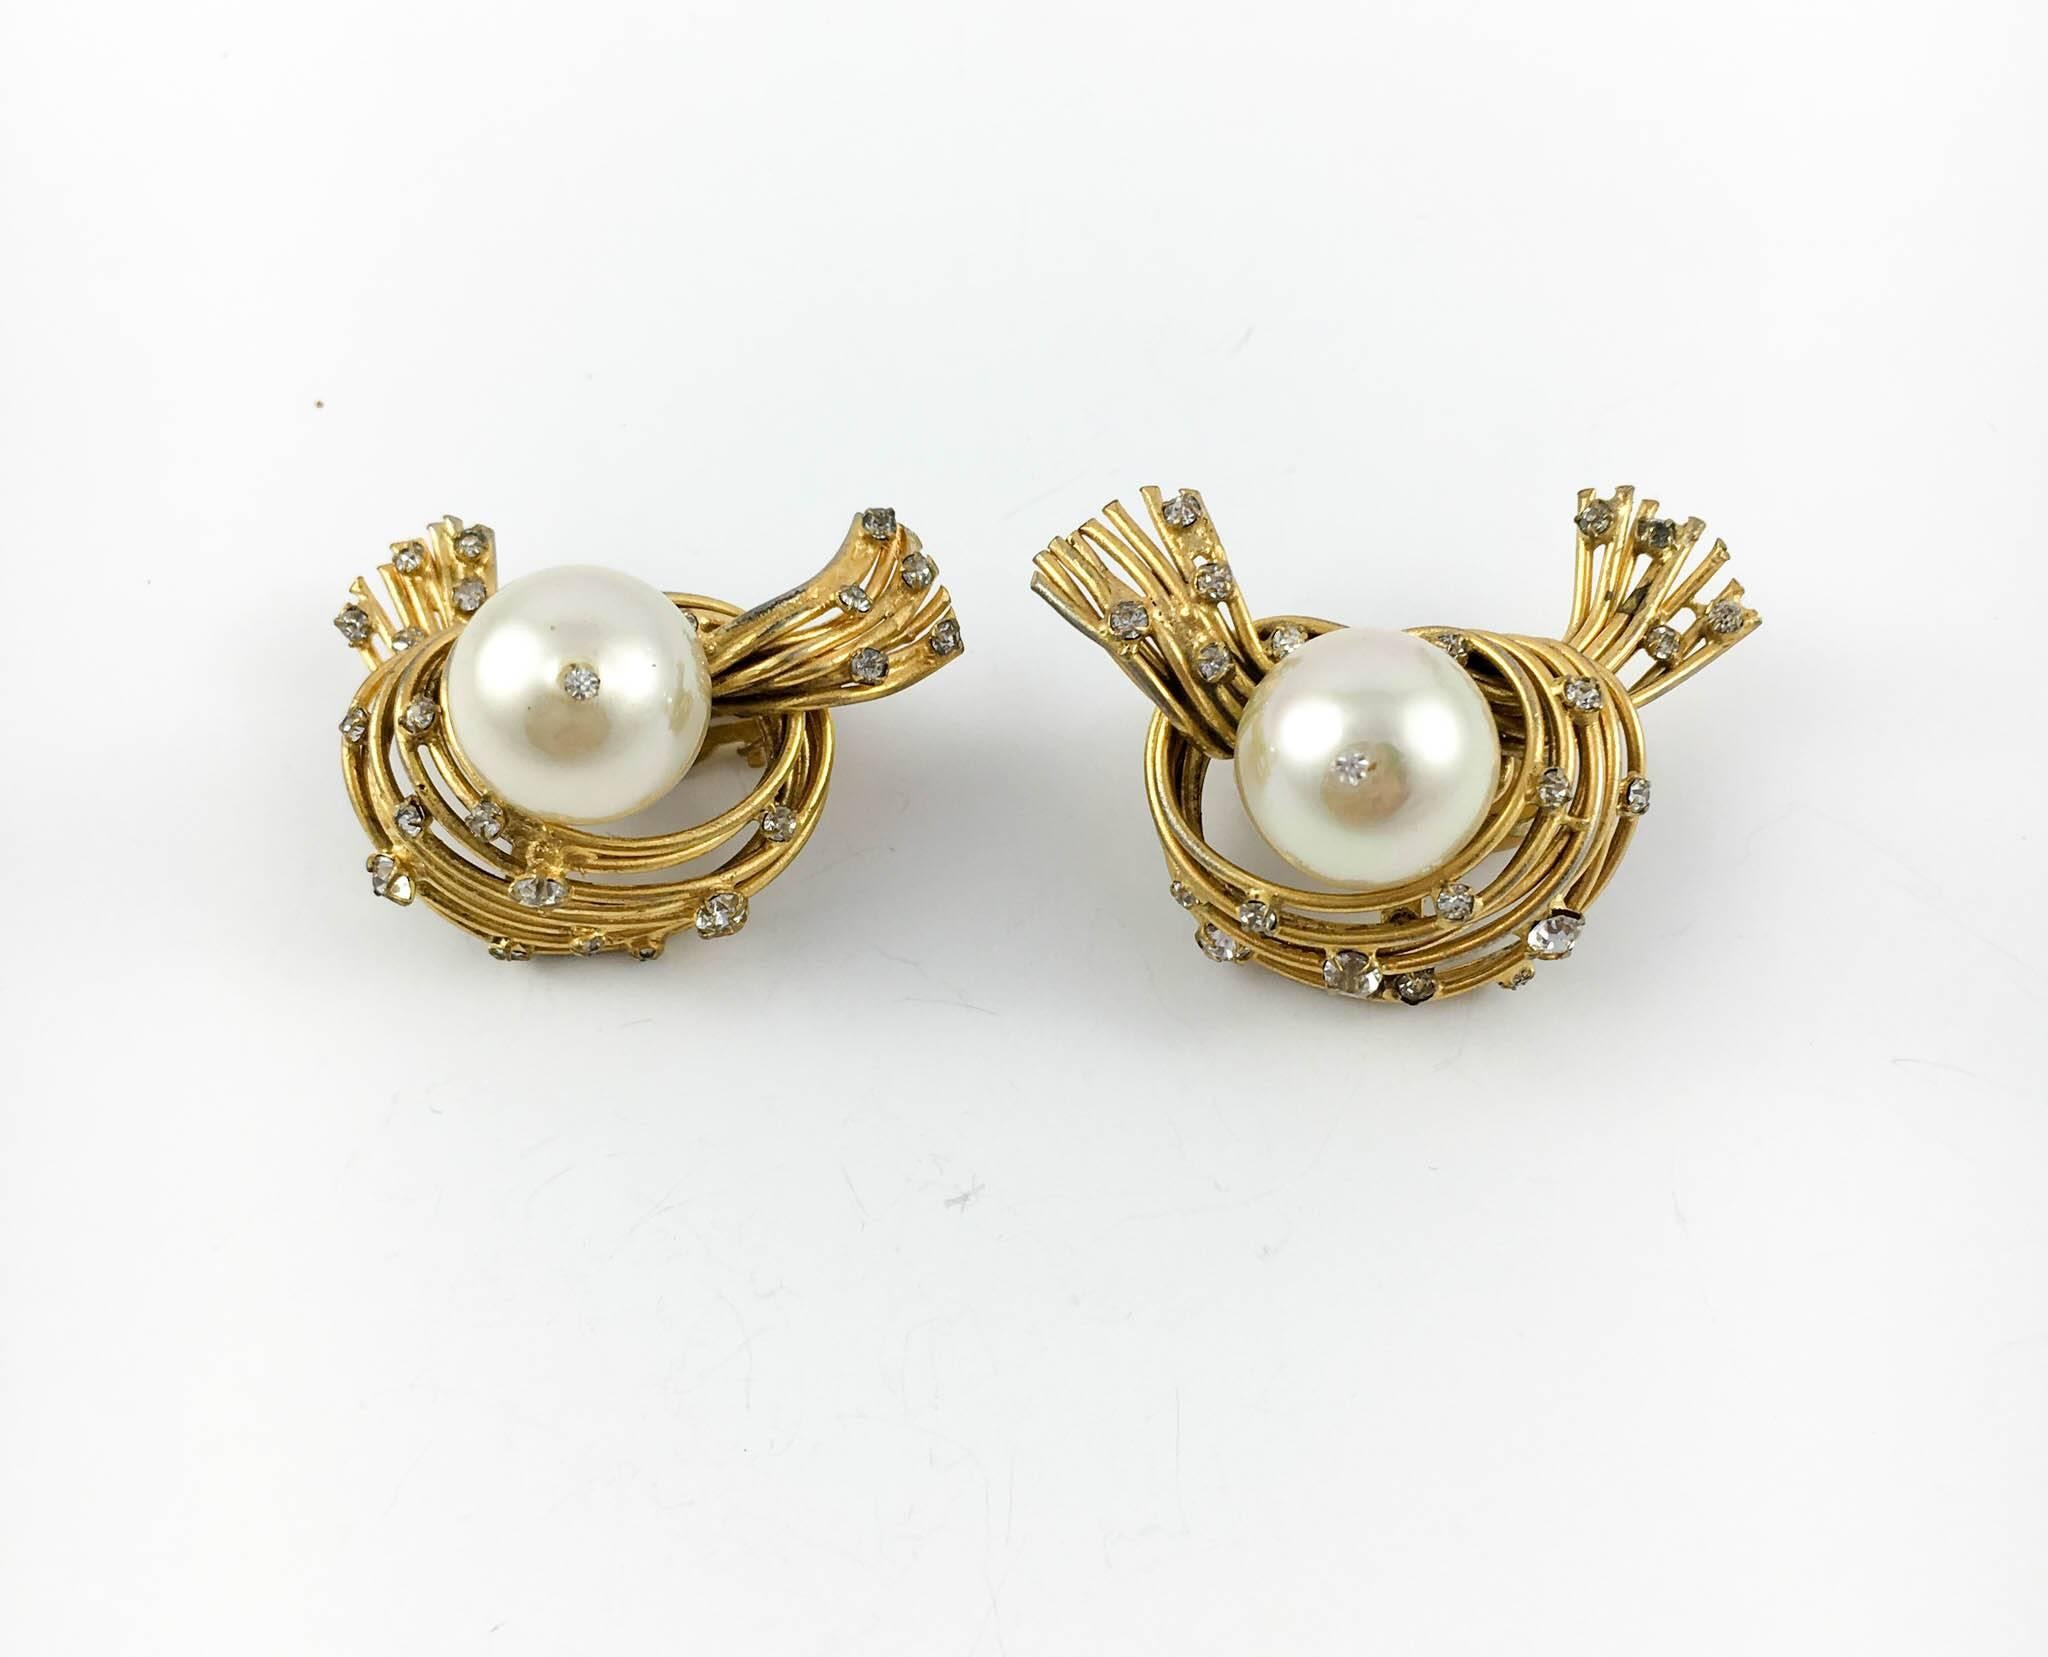 Rare Vintage Chanel Clip-on Earrings. These gorgeous earrings are a classic example of the post-war Chanel costume jewellery line and reflect the new role of women in society (being up and about and still able to wear beautiful versatile jewellery).